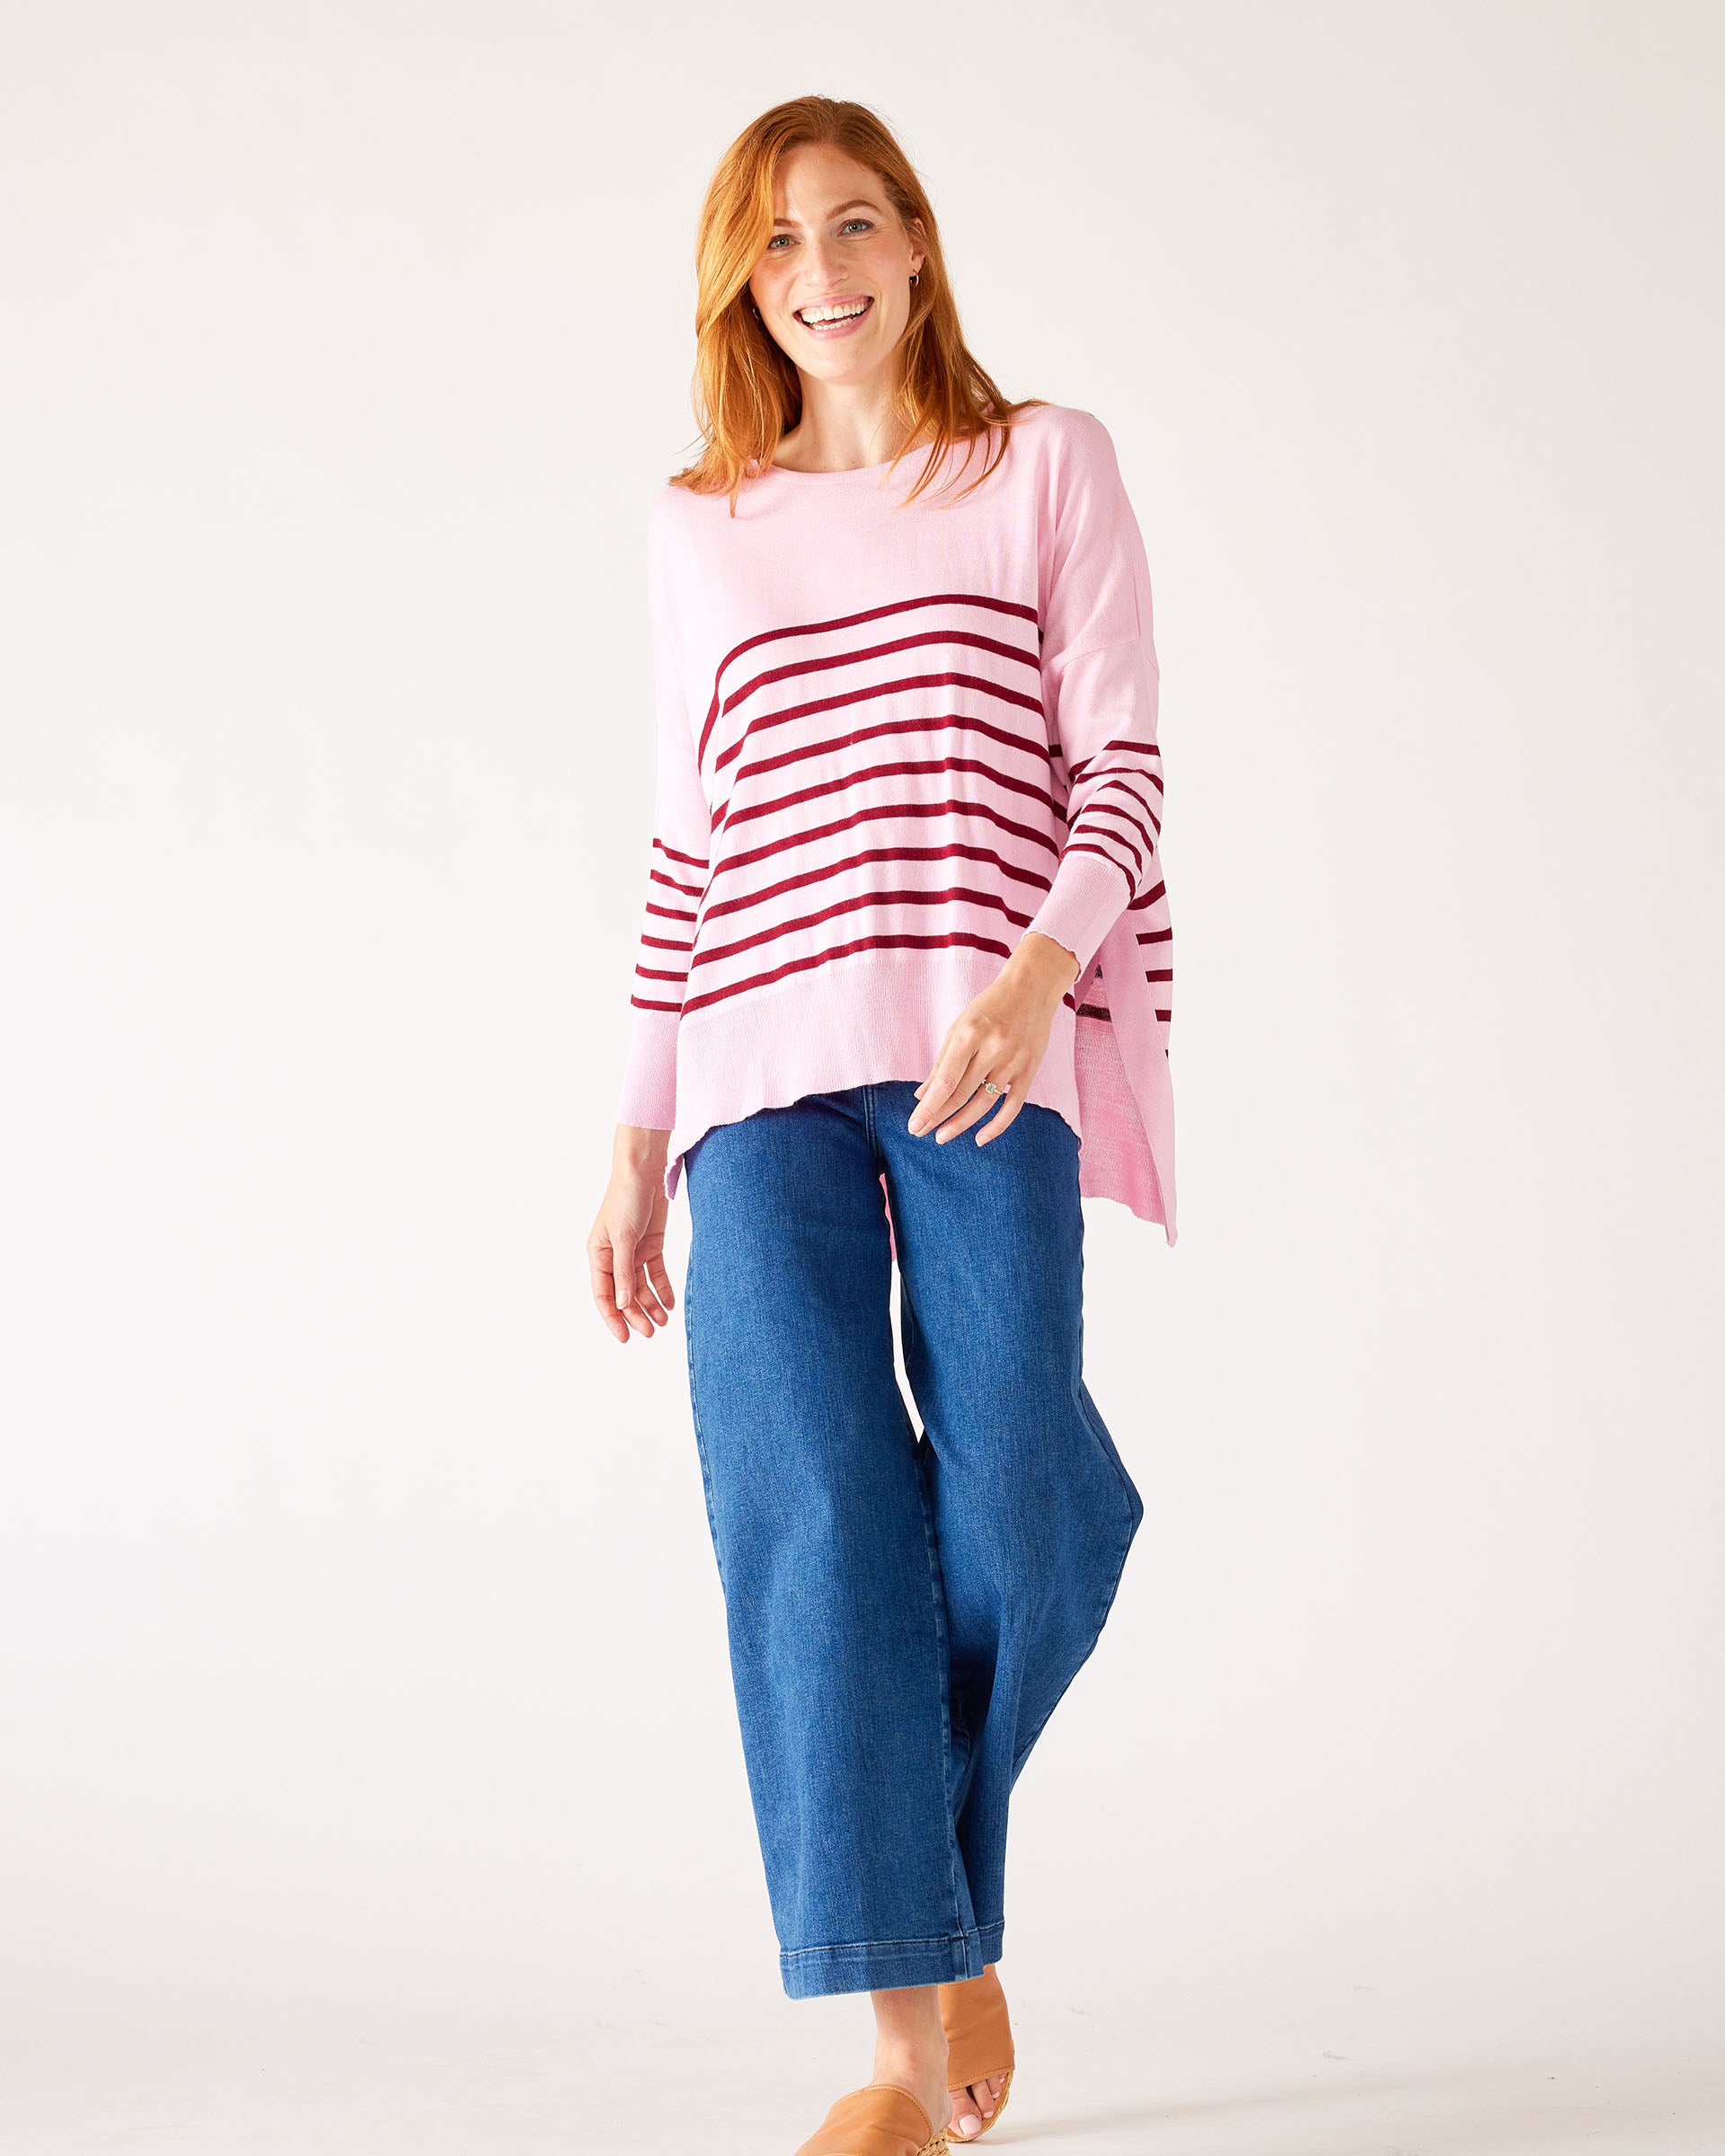 Women's One Size Pink Sweater with Purple Stripes and Hearts on Sleeve Chest View